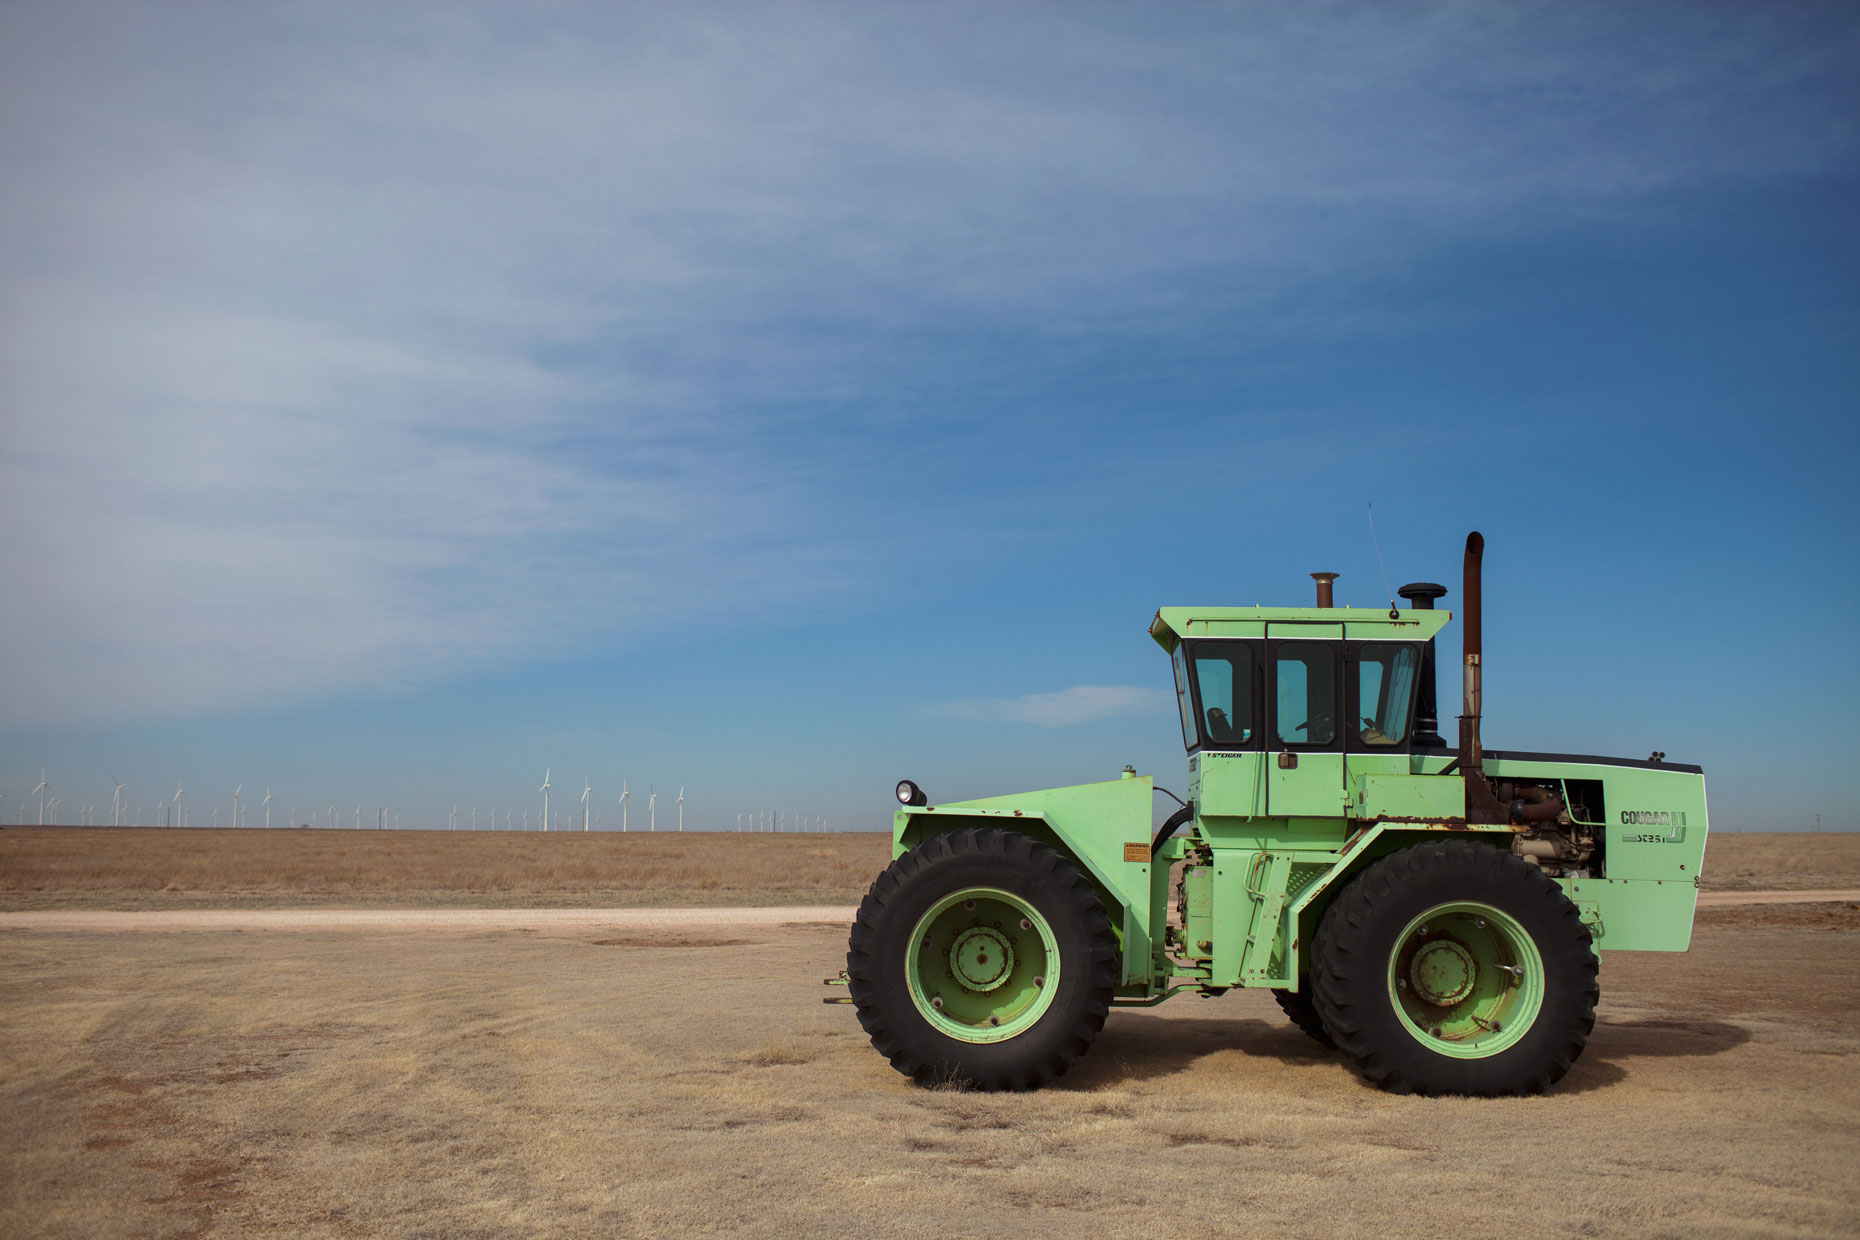 Tractor in the Texas Panhandle